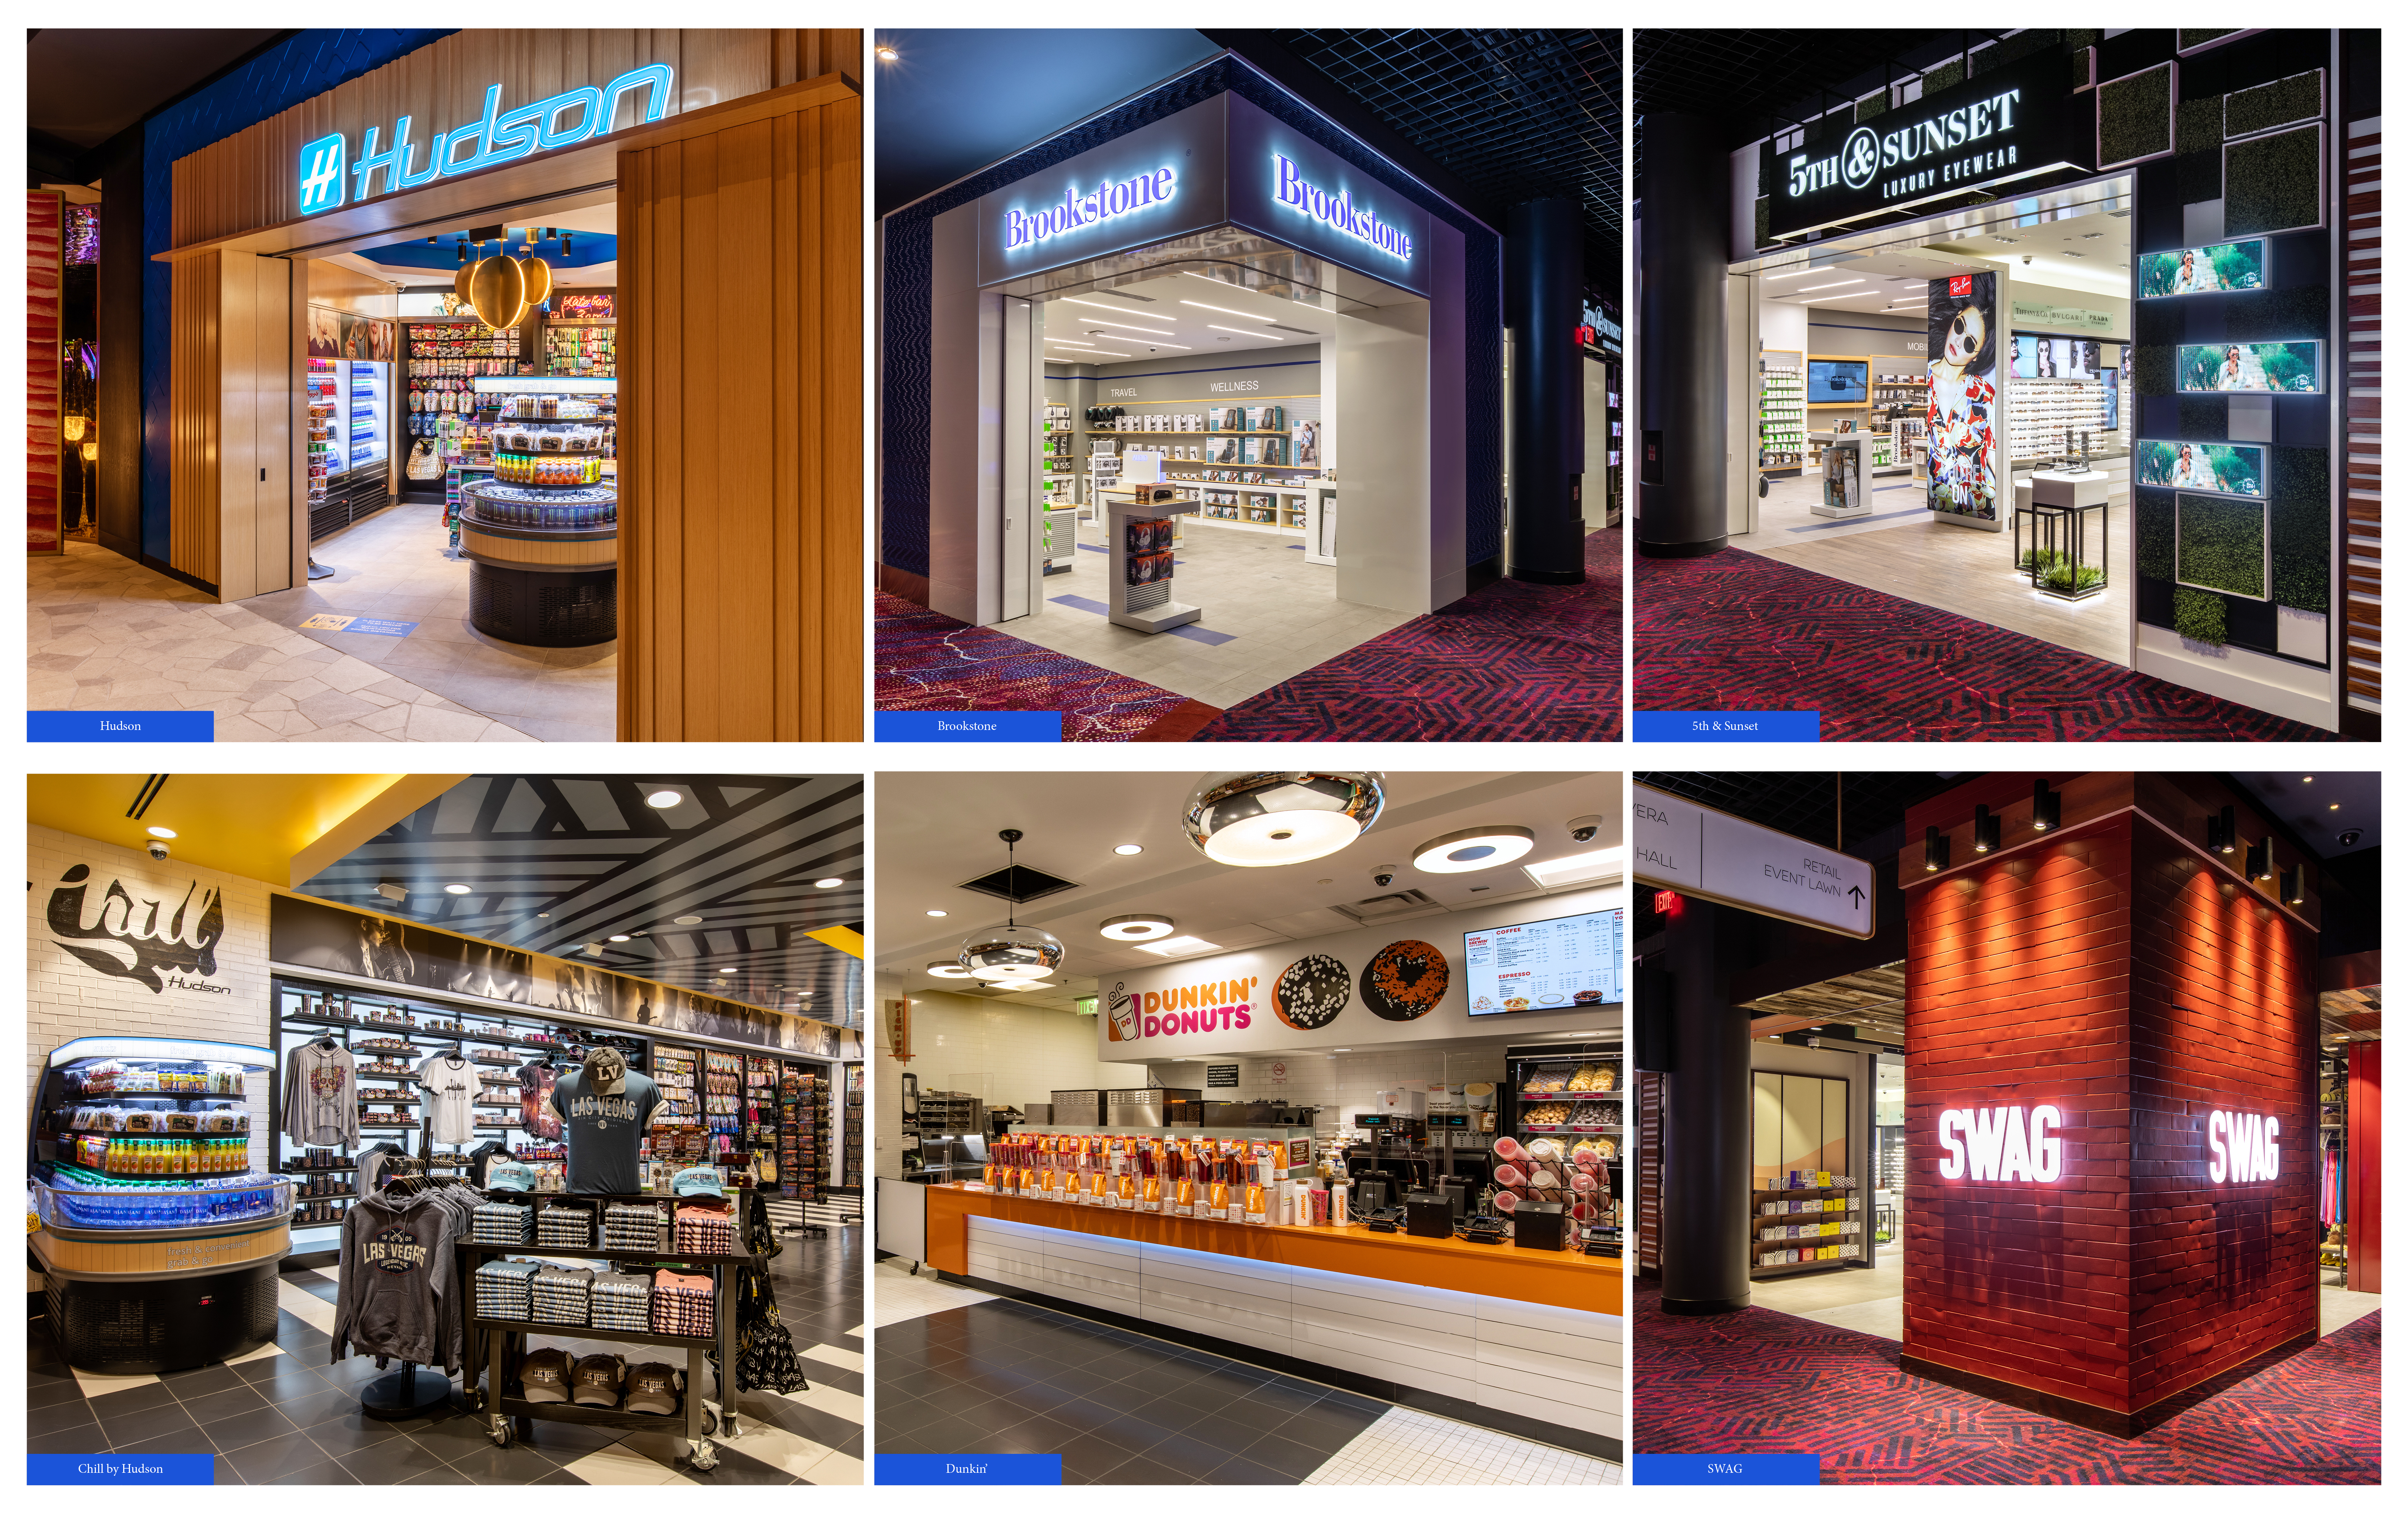 Hudson's New Stores at Virgin Hotels Las Vegas: Hudson, Brookstone, 5th & Sunset, Chill by Hudson, Dunkin' and SWAG